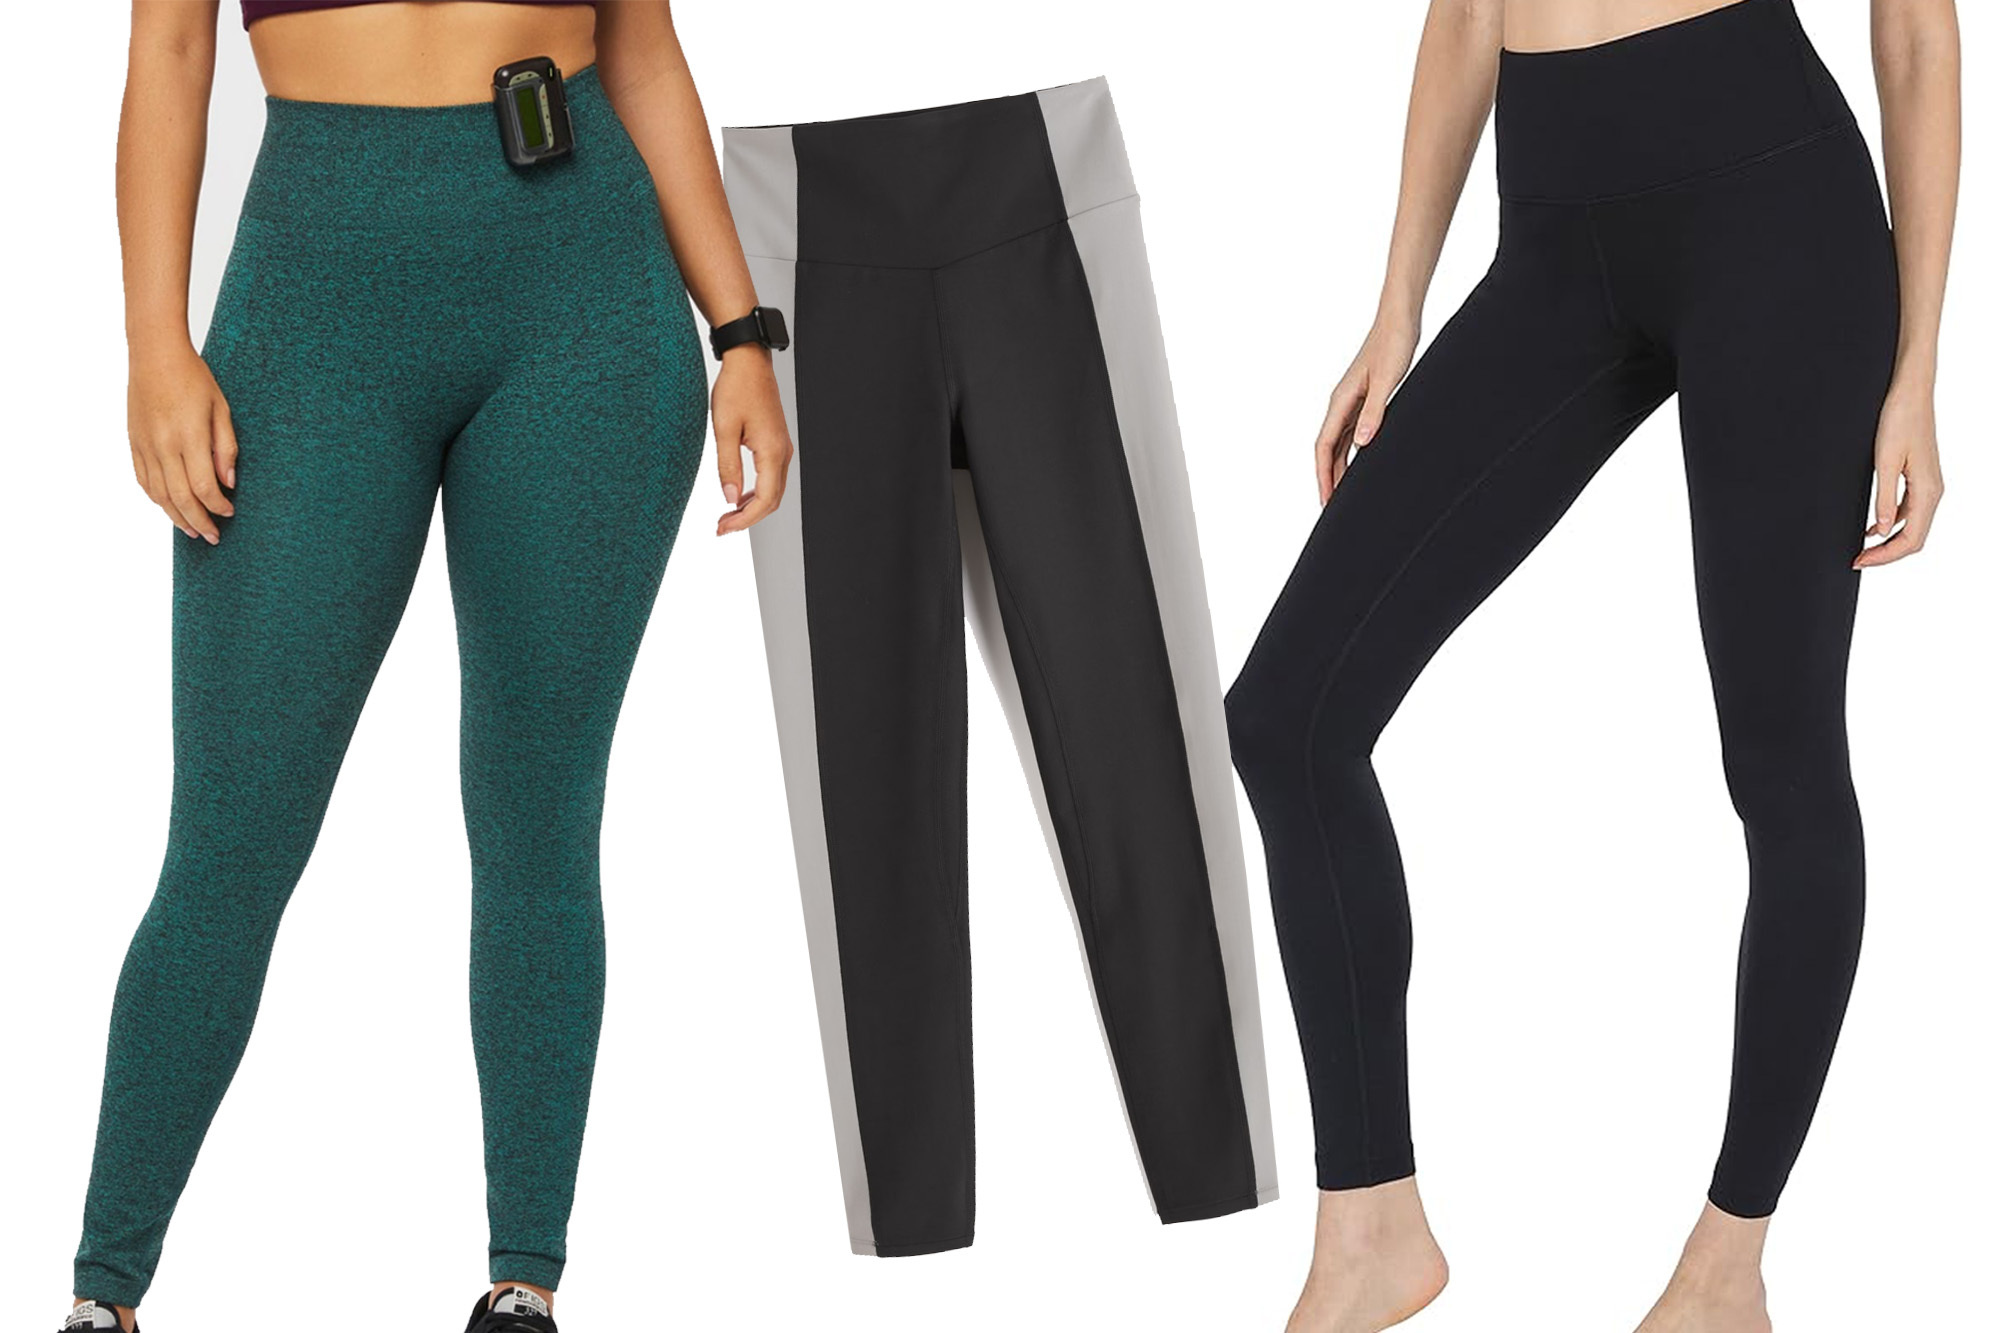 Body Sculpt Leggings: The Best Compression Leggings for Smoothing